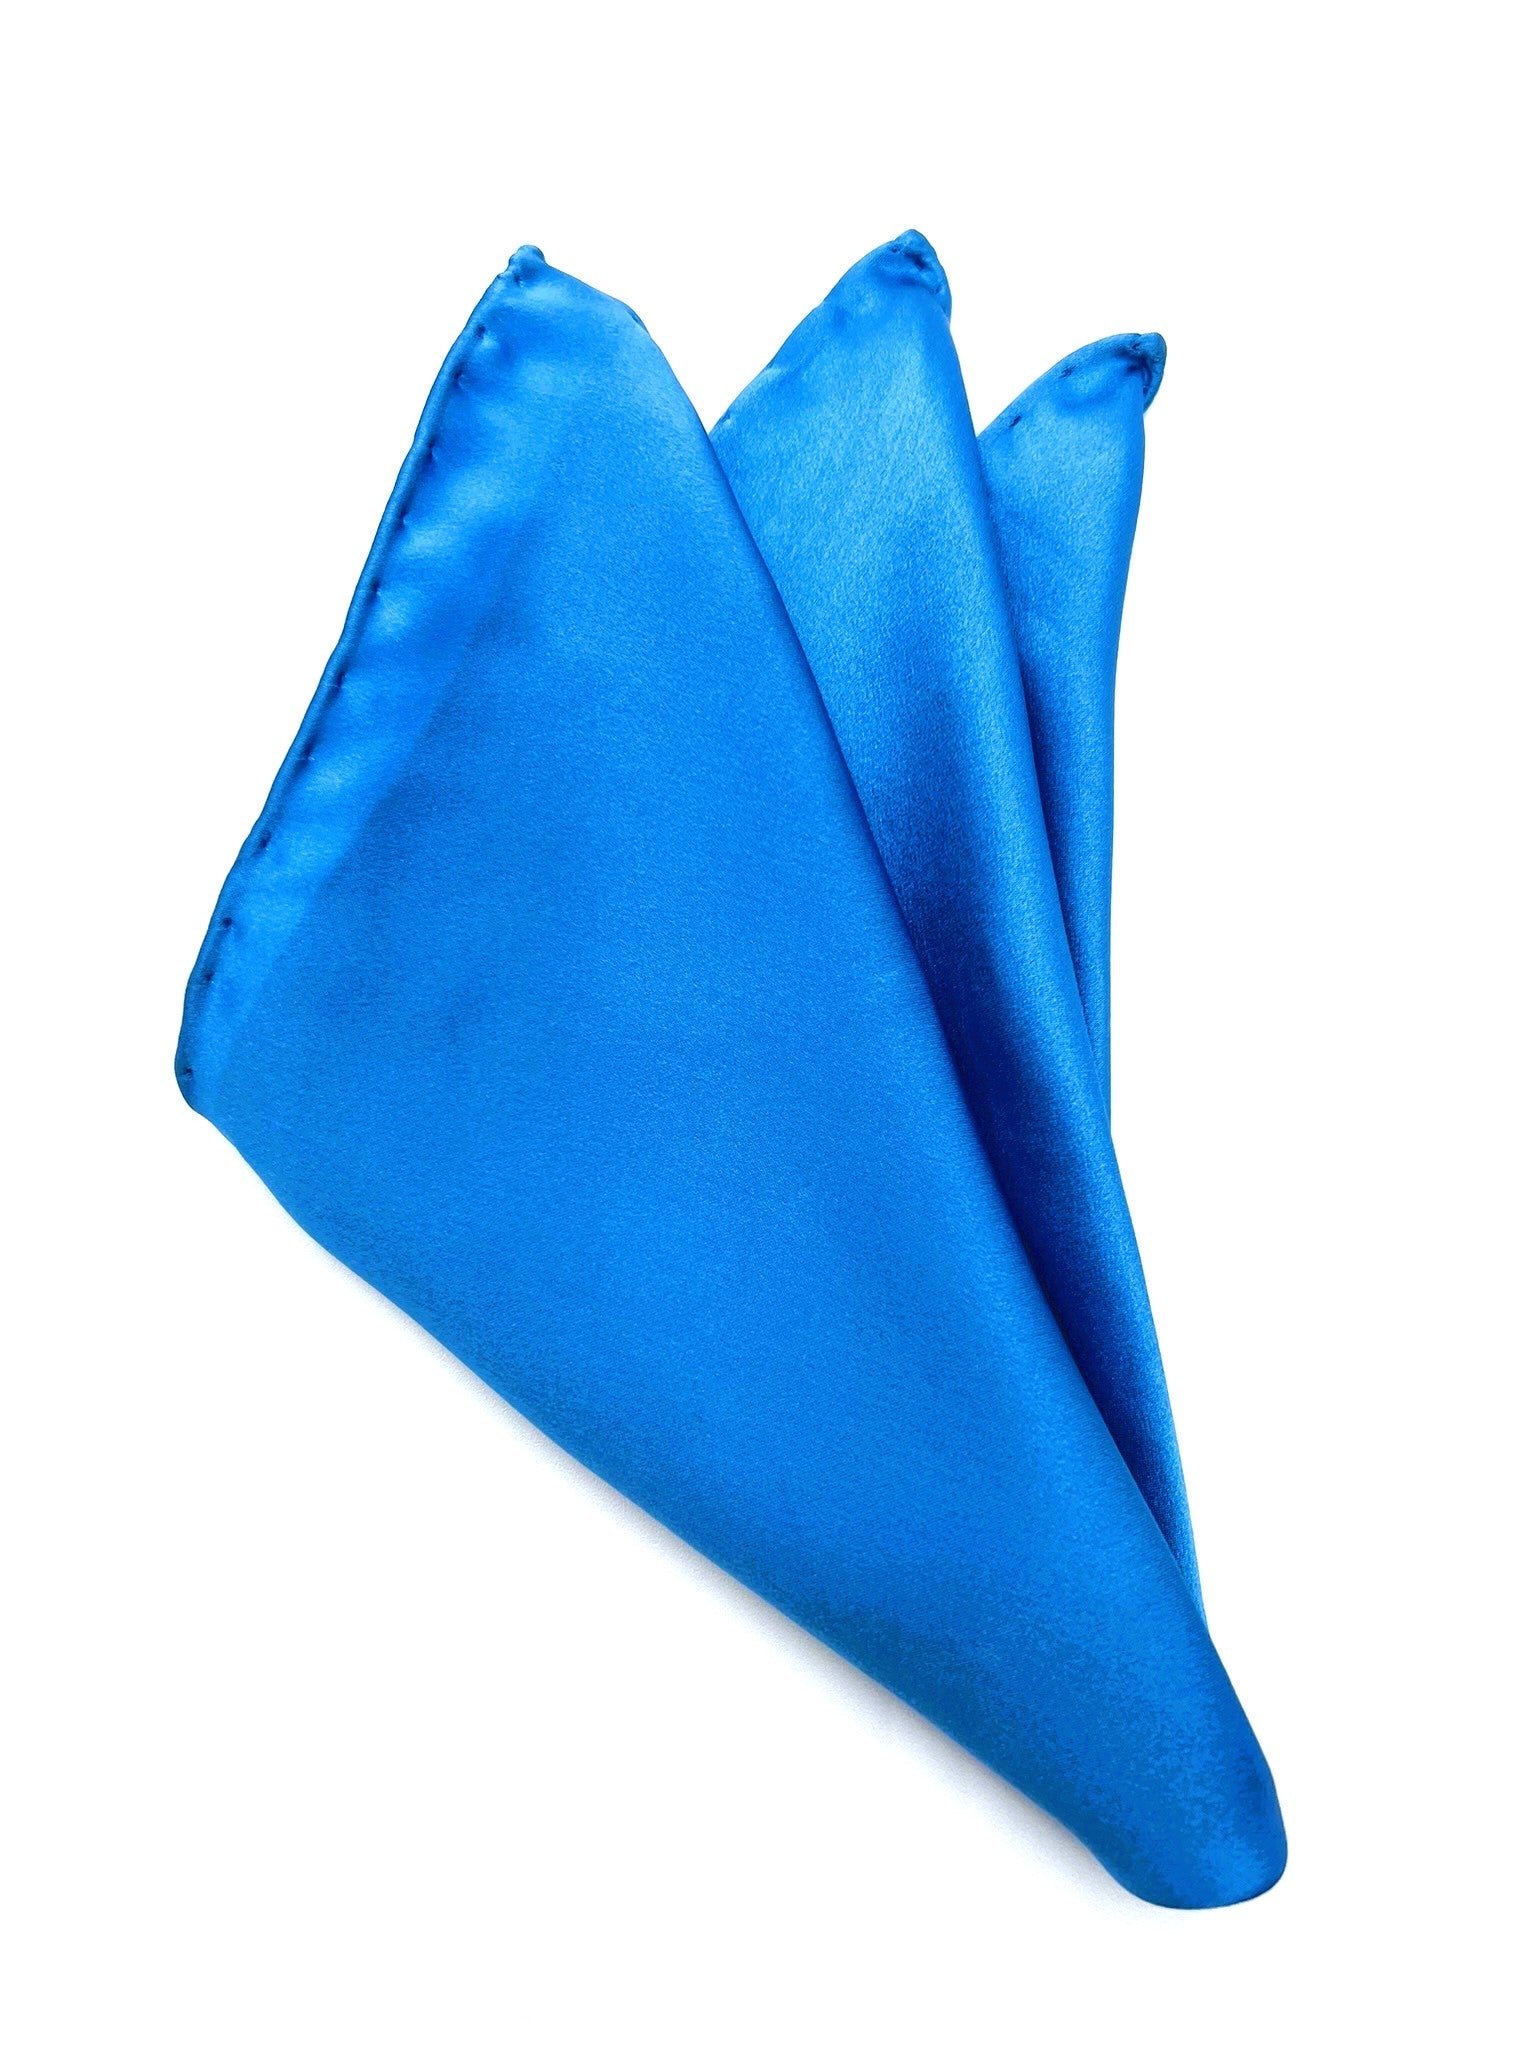 Sky Blue Silk Pocket Square. Handmade in Italy. Pocket Square in 100% pure Italian silk,  hand-finished edges. A must-have accessory for every  man's wardrobe that can suit either  a classic or sophisticated look.| Sartoria Dei Duchi - Atri